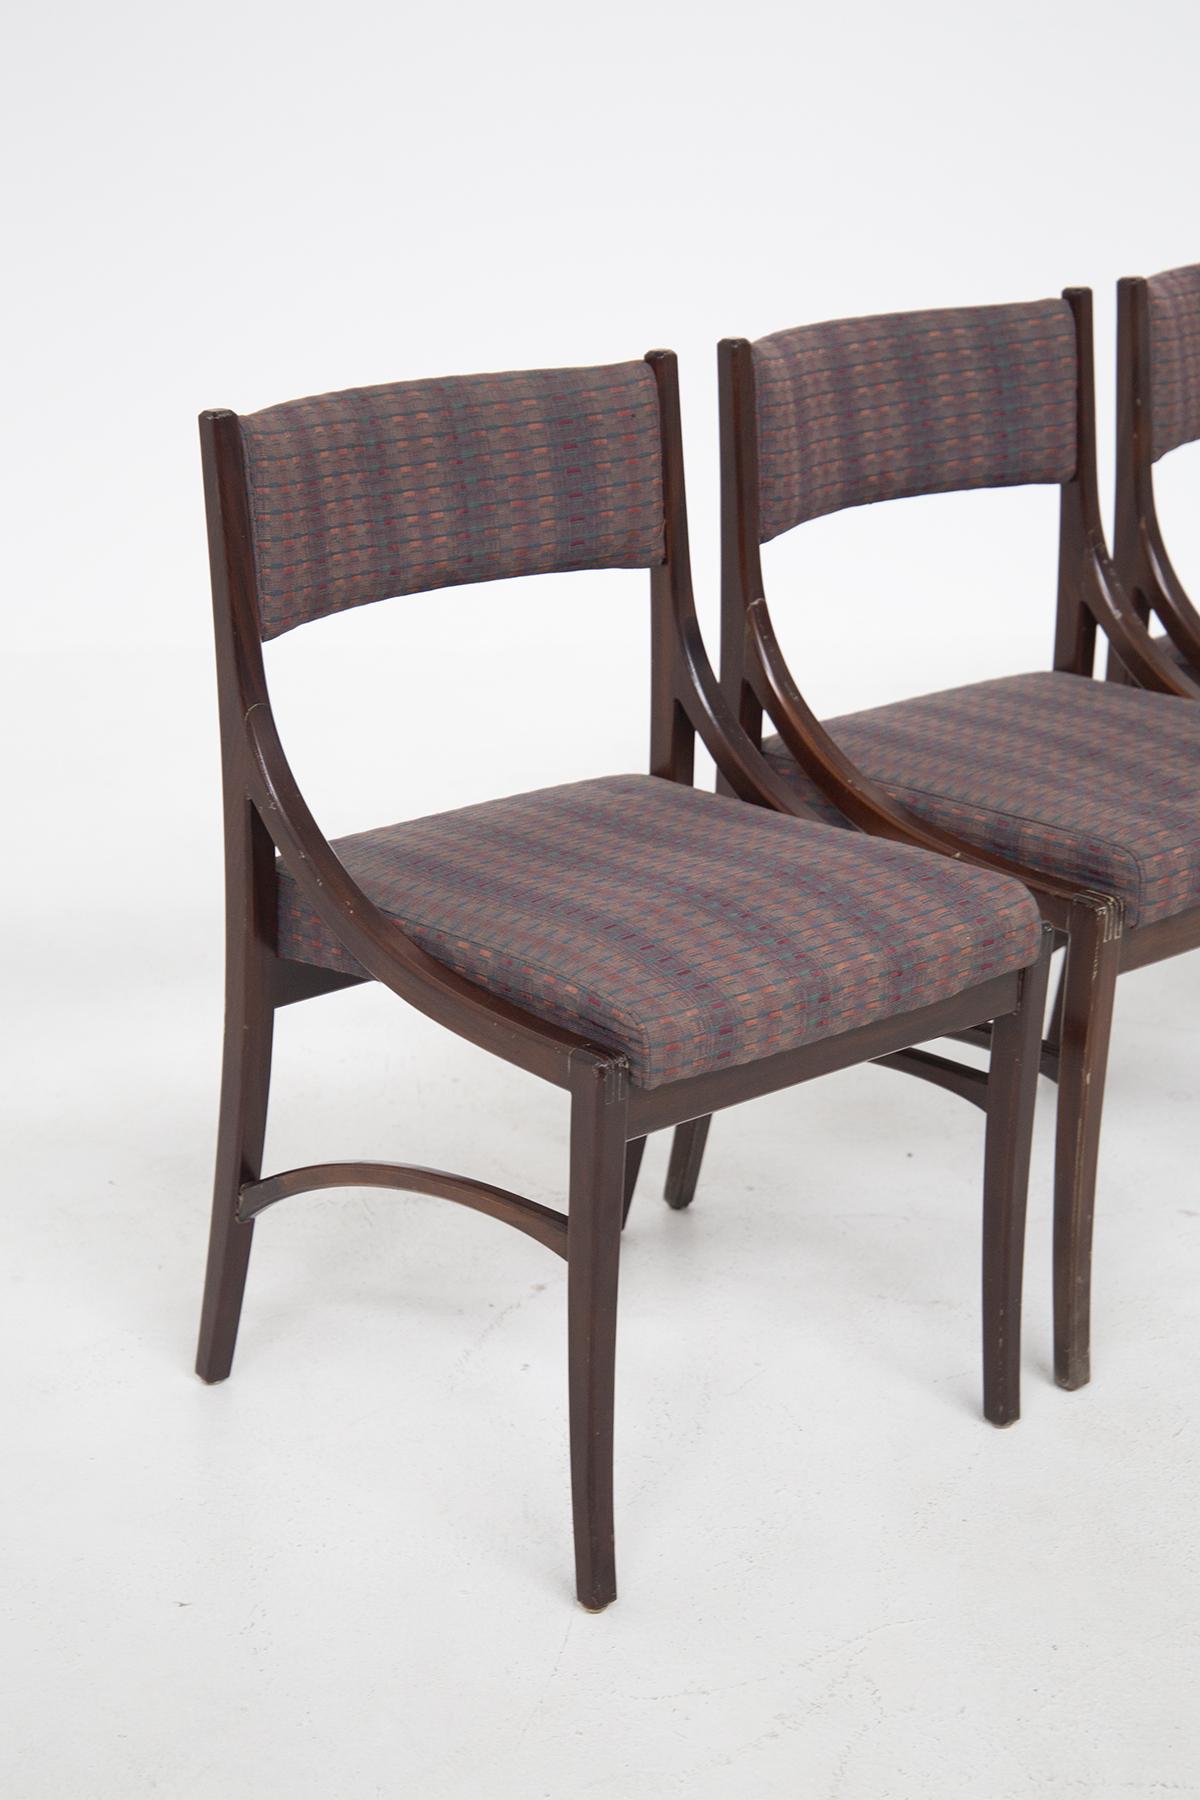 Set composed of four vintage Italian chairs from the 1970s. The chairs have dark wood frame and goes to frame the seat with sinuous and soft shapes. The seat and back of the vintage Italian chairs are made of original fabric from the era. The fabric